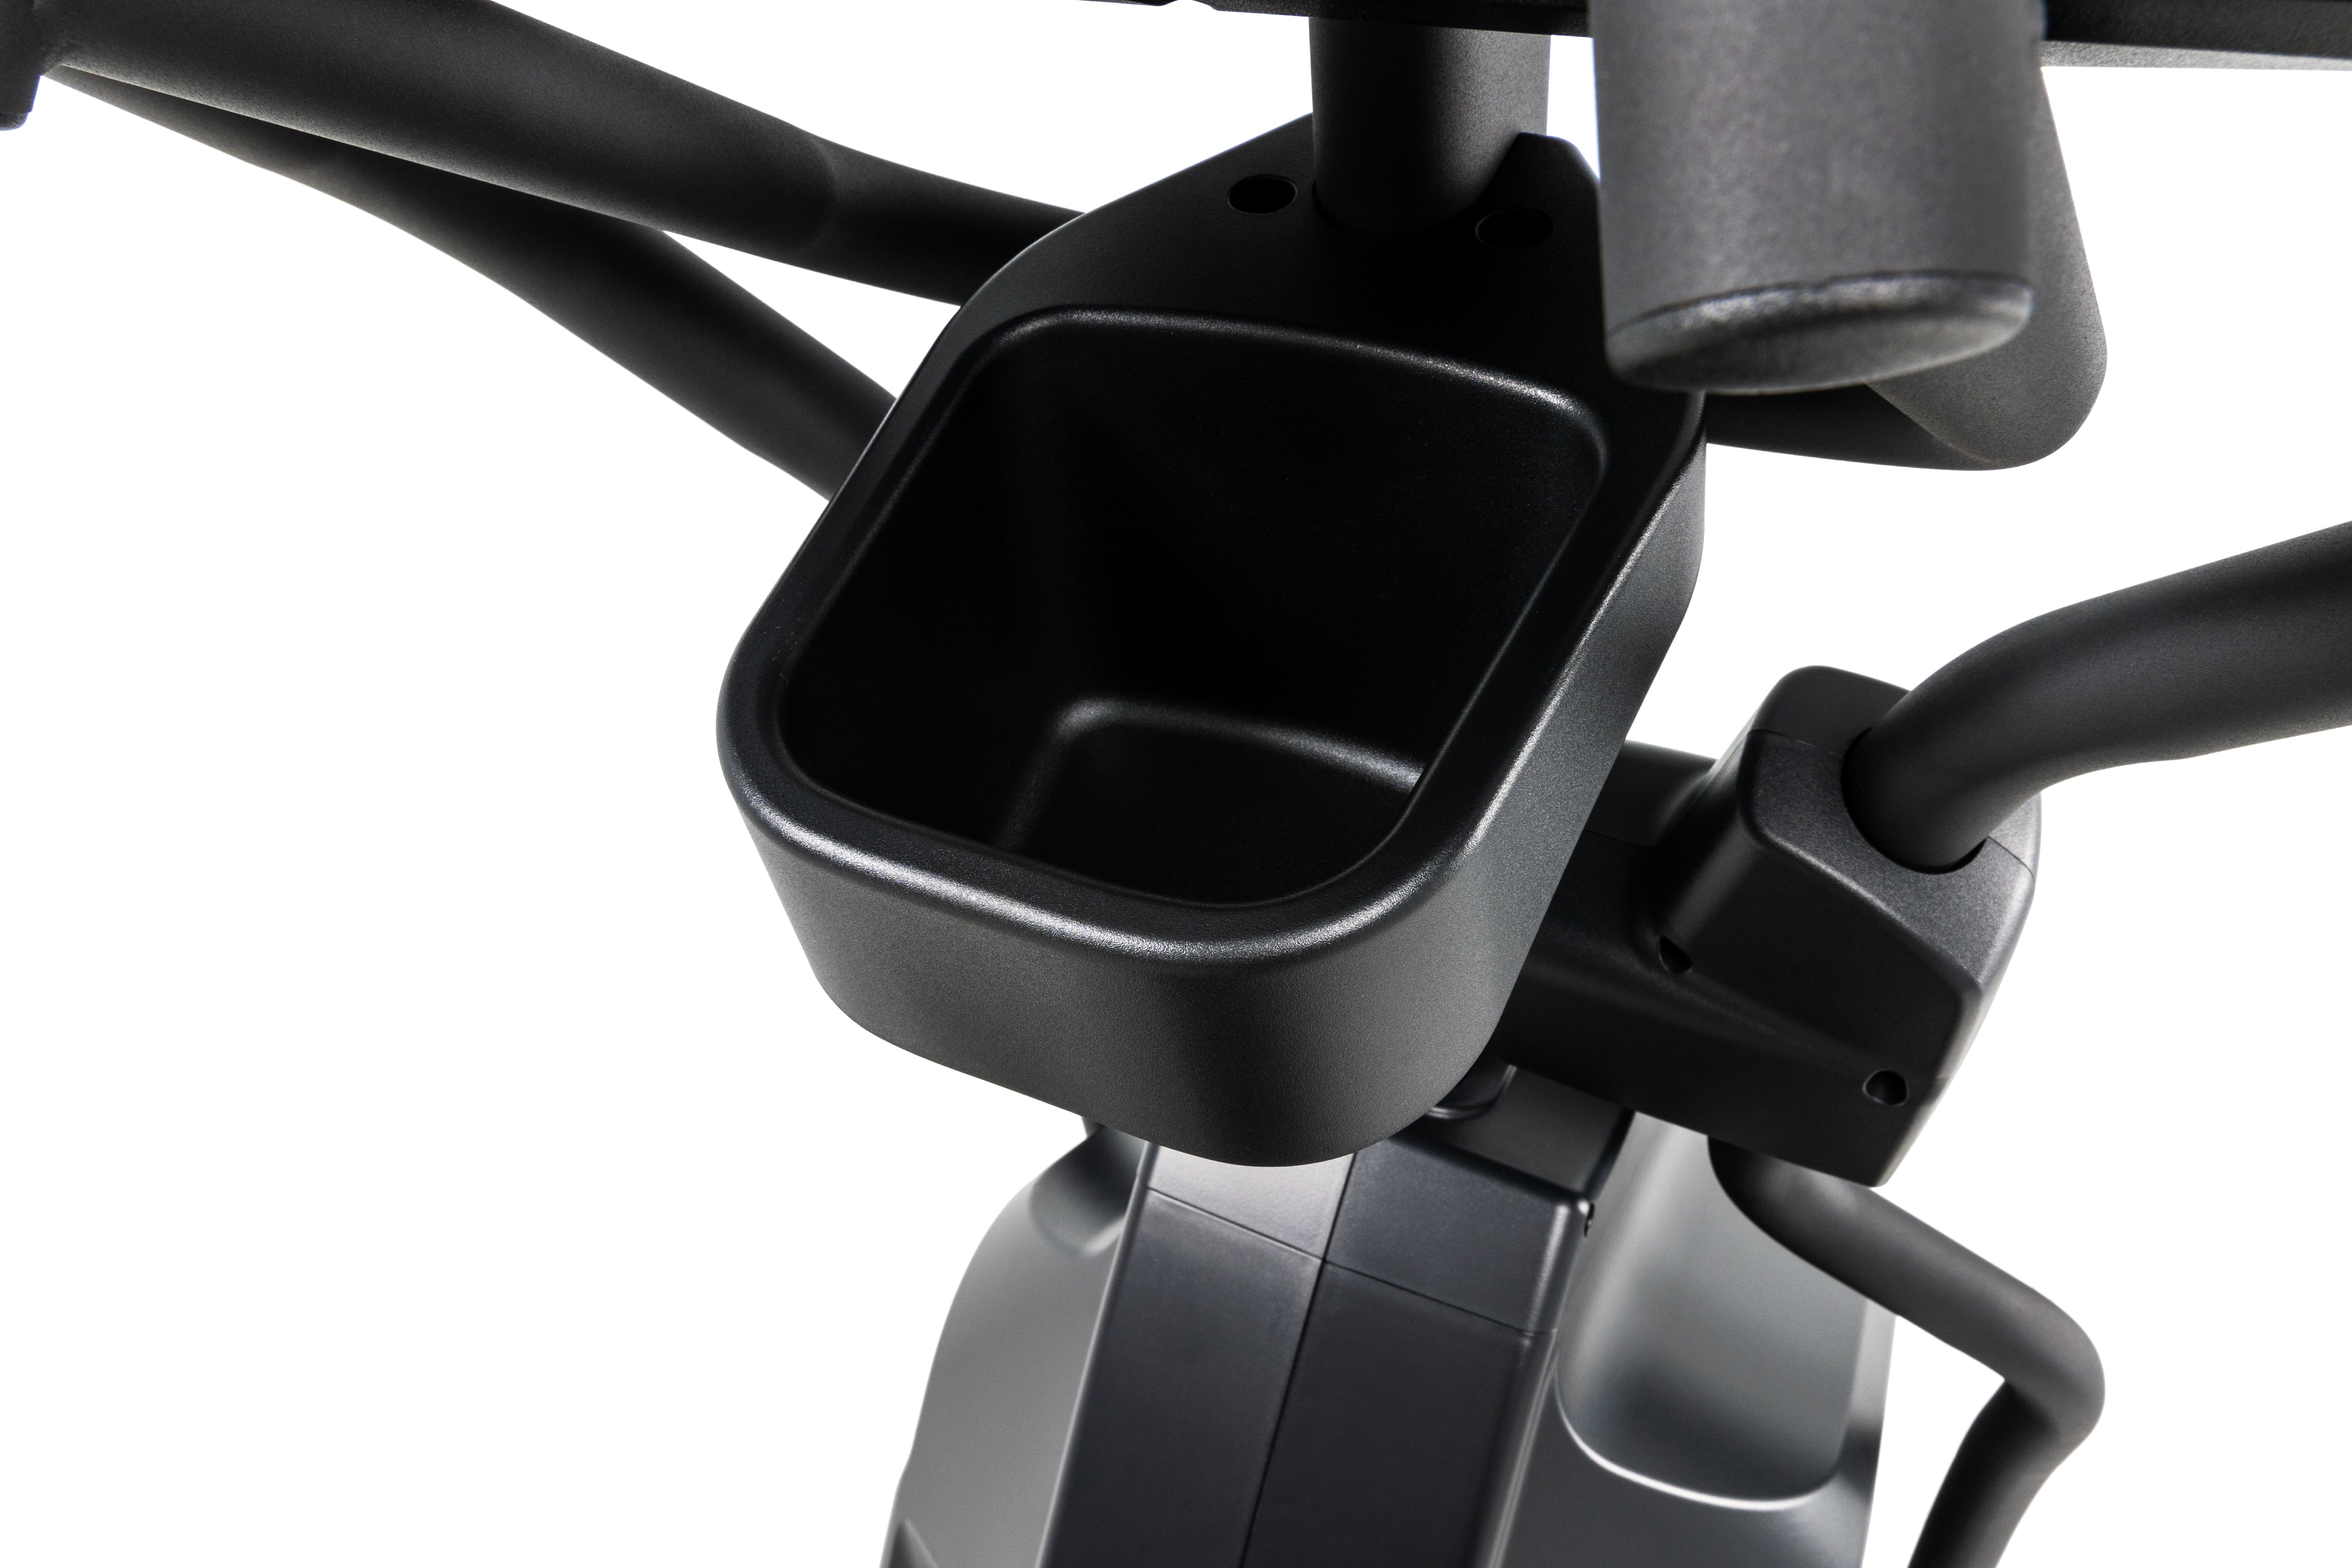 Close-up of the Sole E95S elliptical machine's handle and accessory holder, showcasing the matte black finish, storage compartment, and a portion of the machine's frame.